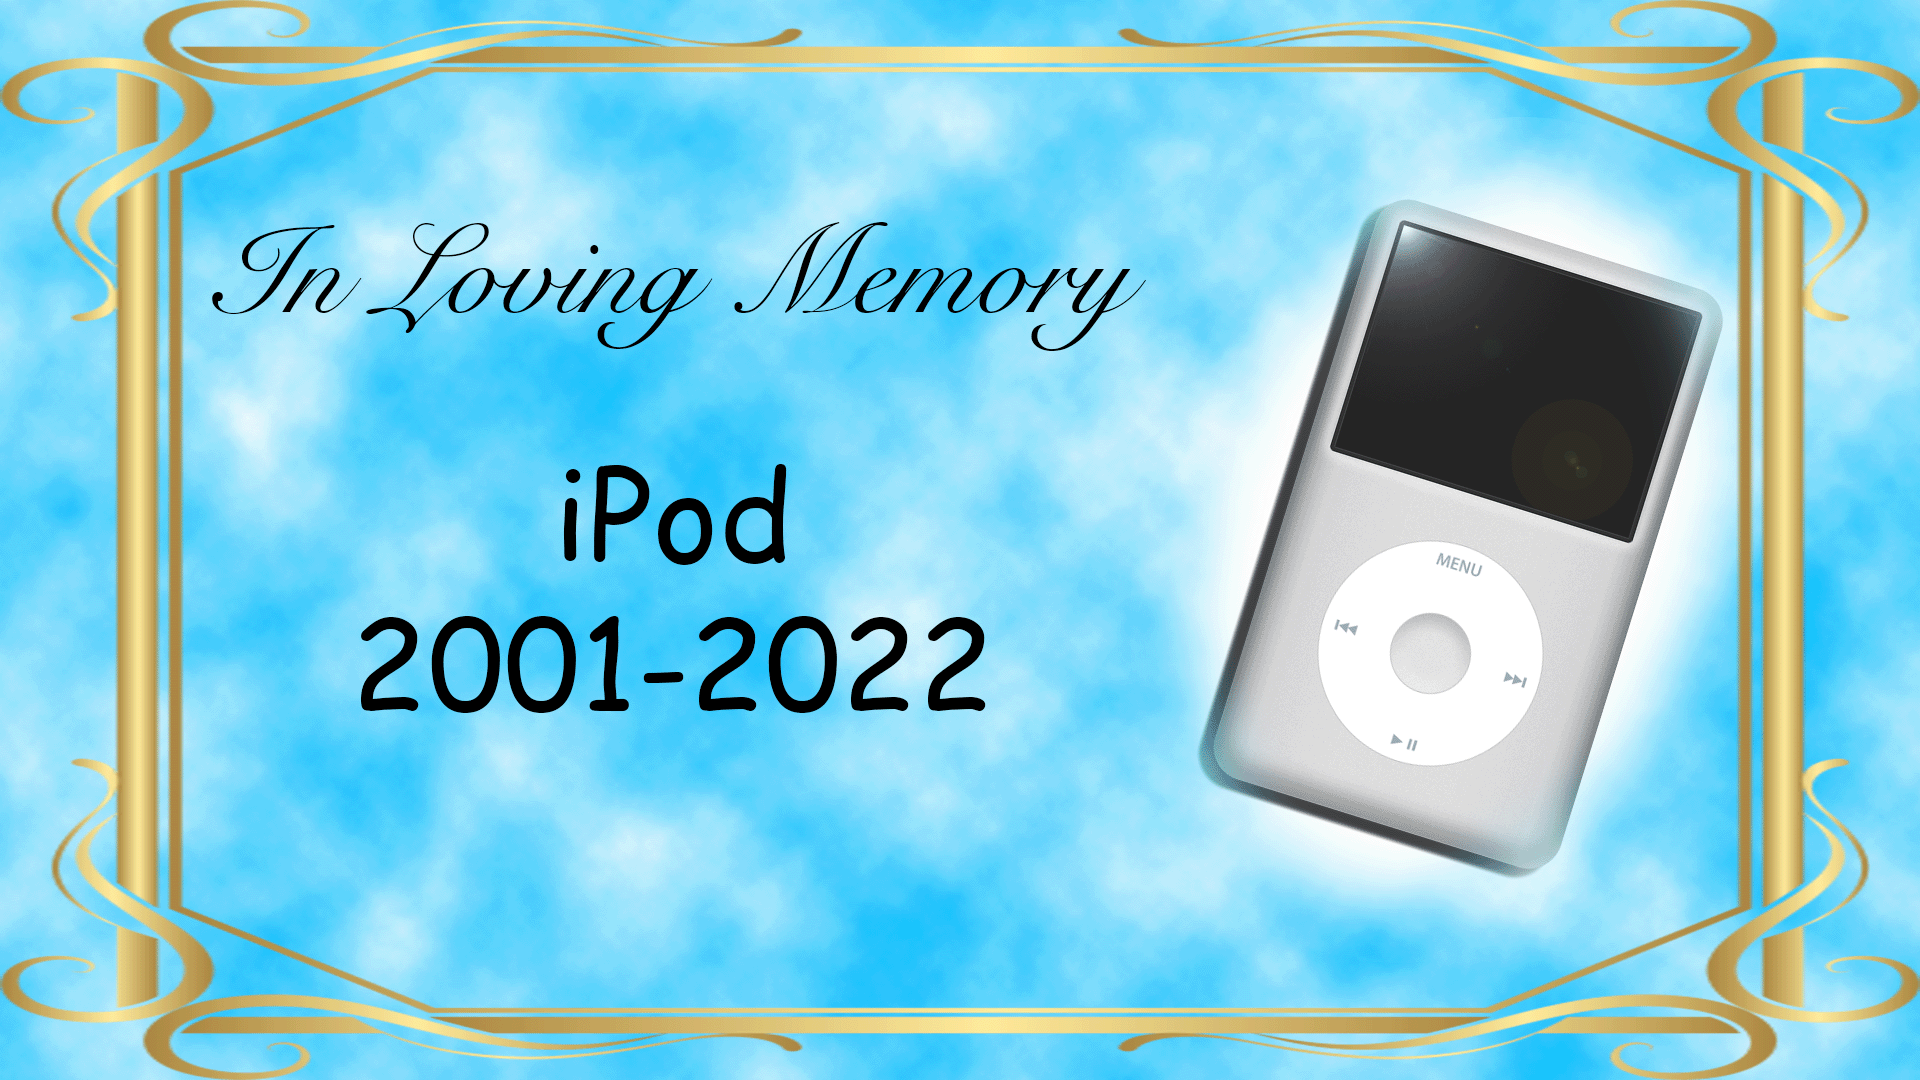 Apple Has Finally Discontinued The iPod After Nearly 21 Years